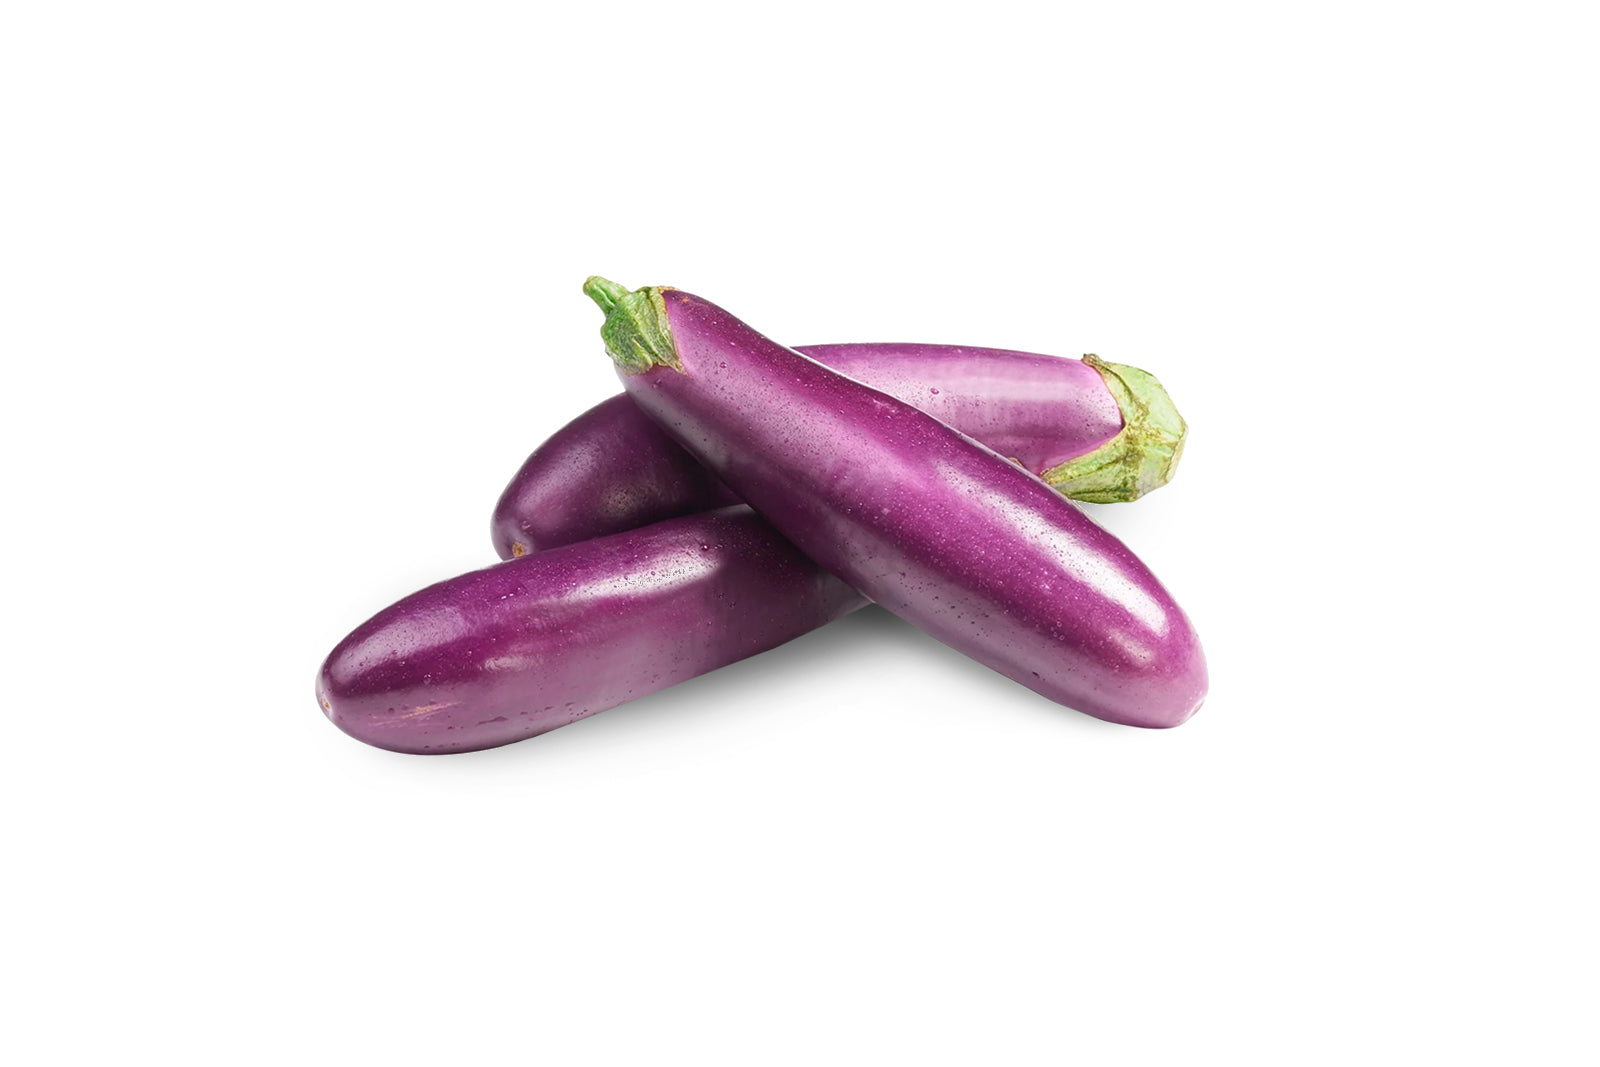 Fresh Veggies Vegetables Online Delivery Singapore Wholesale Fruits Vegetables for Cafes Hawkers and Restaurant Gifting Homebase Bakery - Brinjal Eggplant 茄子